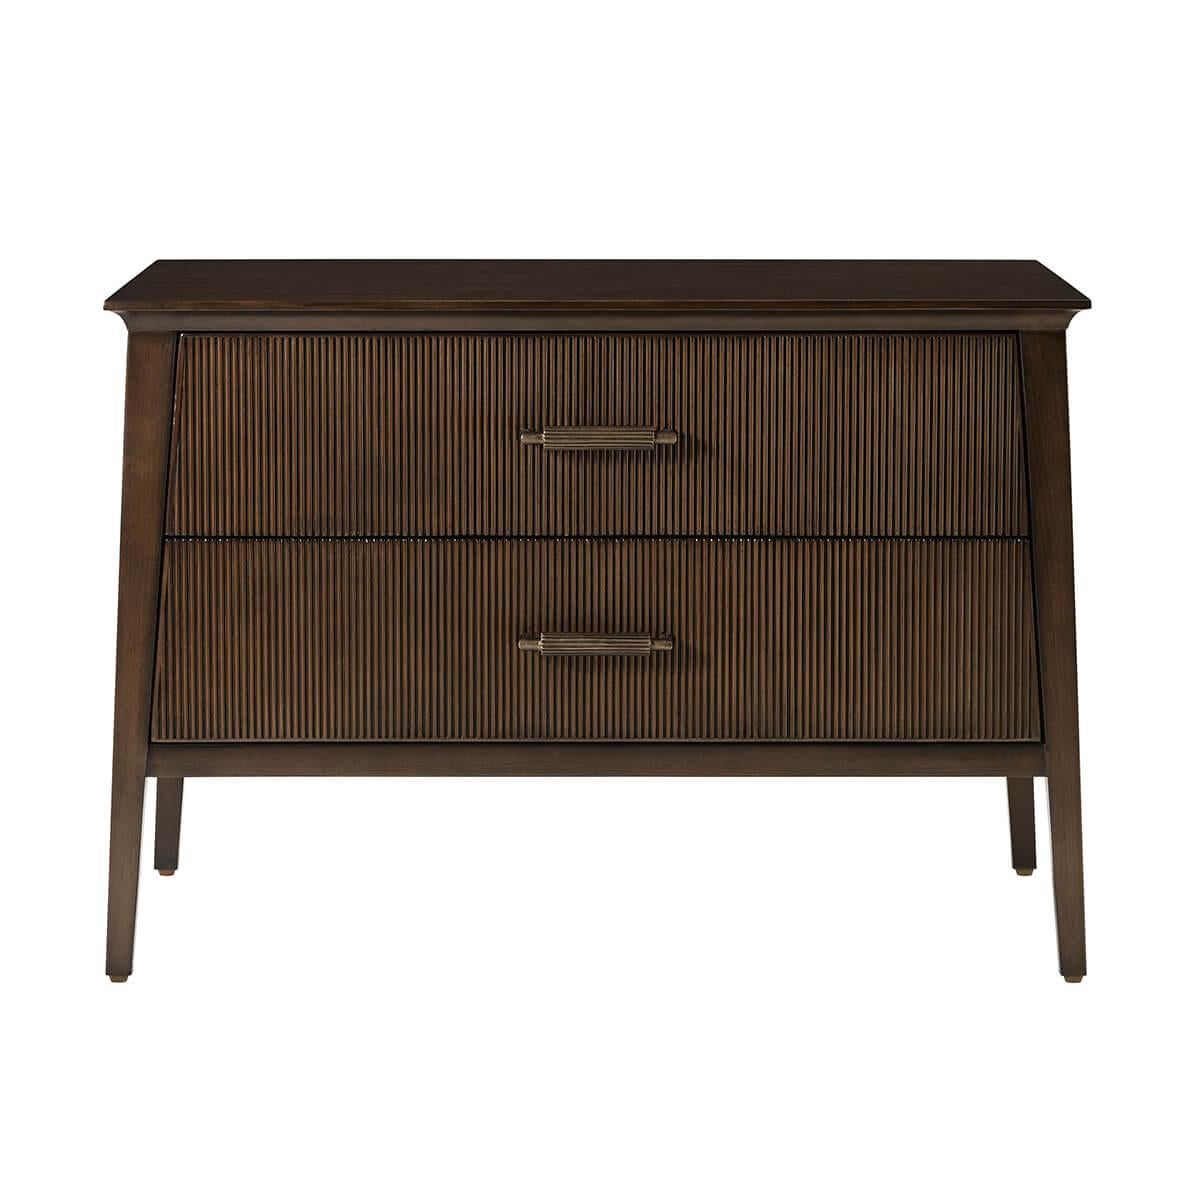 Crafted in dark Bistre finish, features a sophisticated tapered silhouette with three reeded drawers. The custom forged hardware, finished in a dark rubbed bronze, echoes the reeded details throughout.

Dimensions: 32